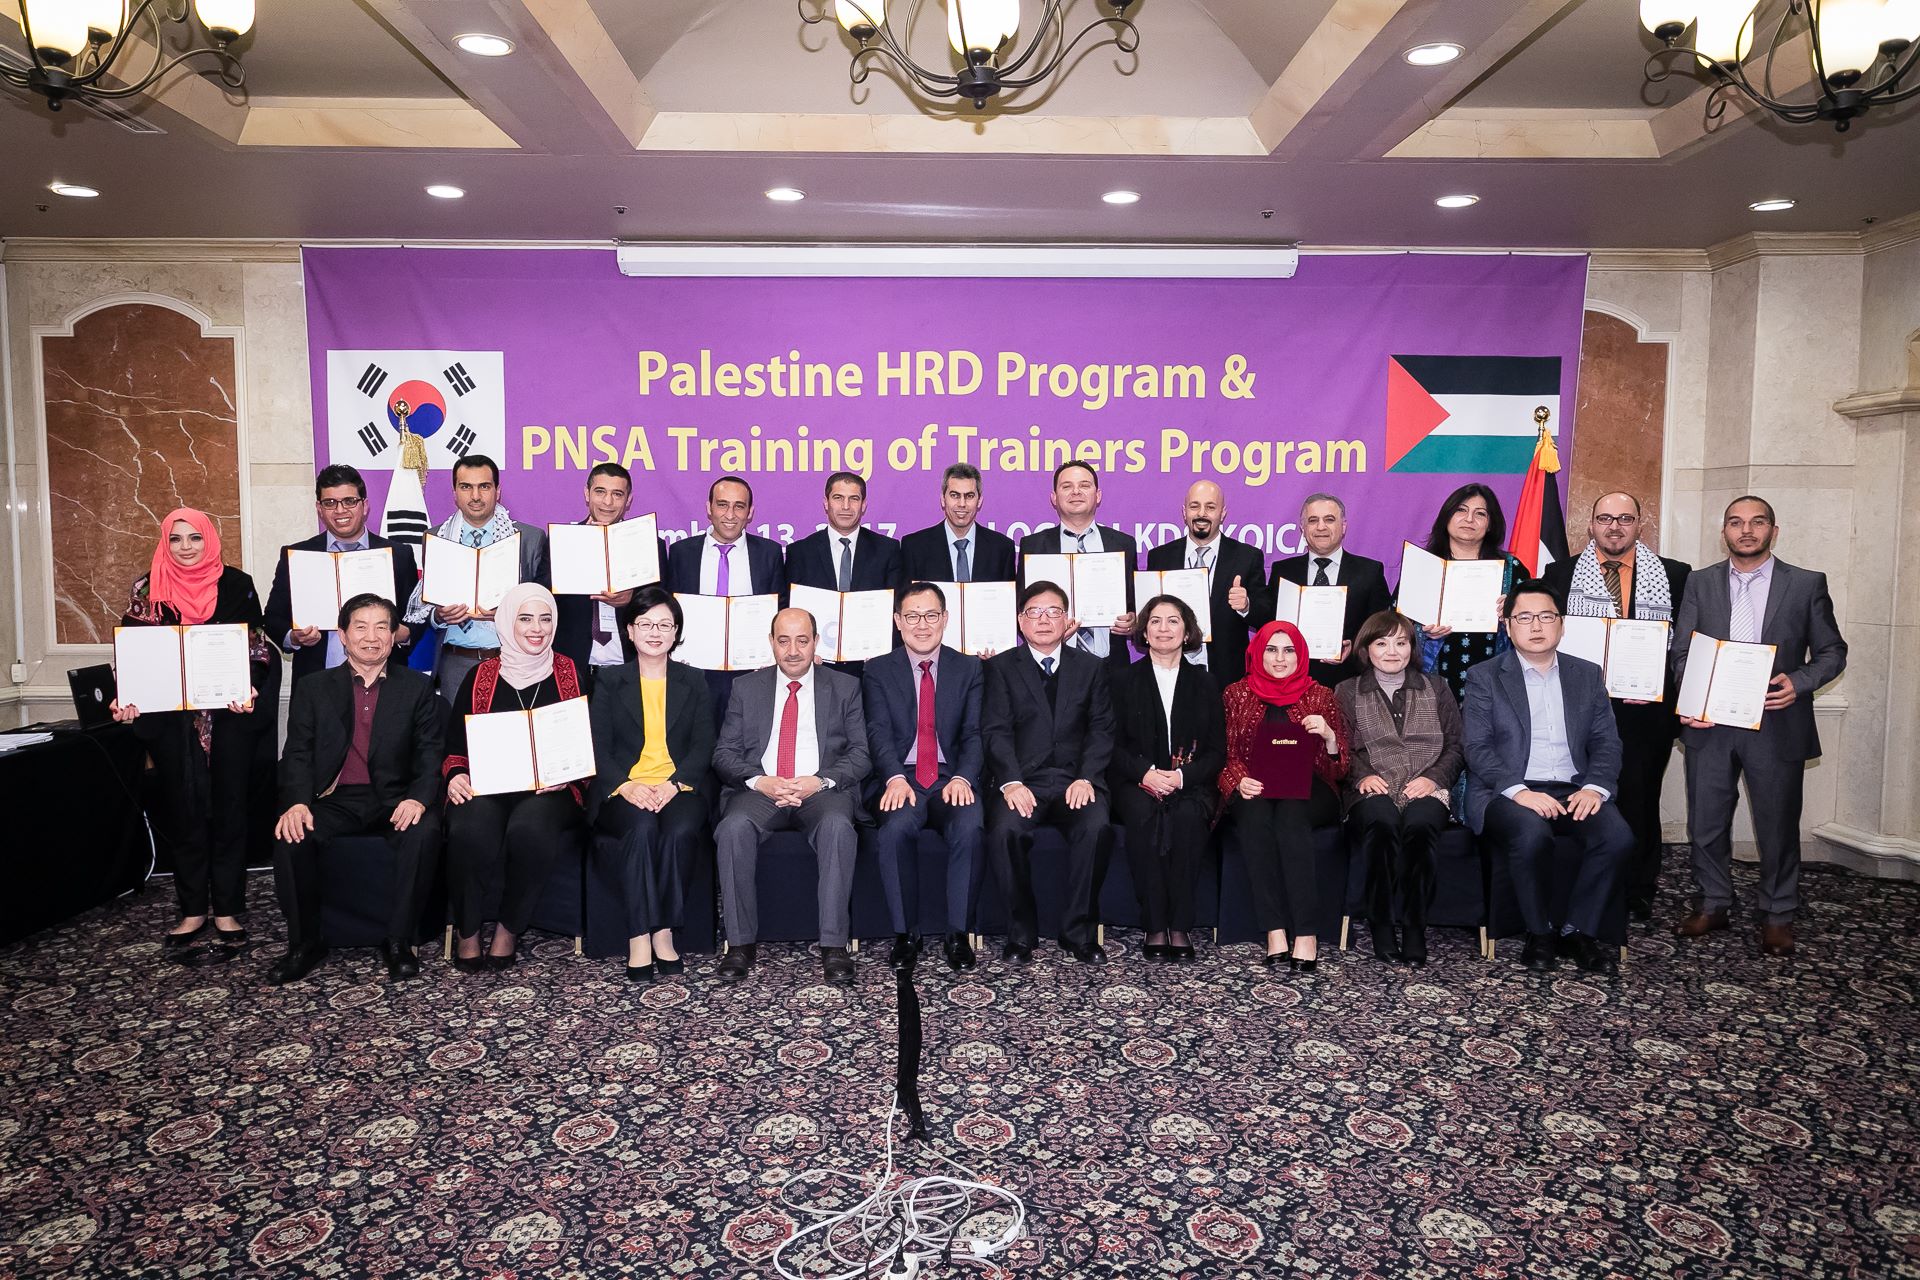 LOGODI bids farewell to PNSA trainers, welcomes HRD managers